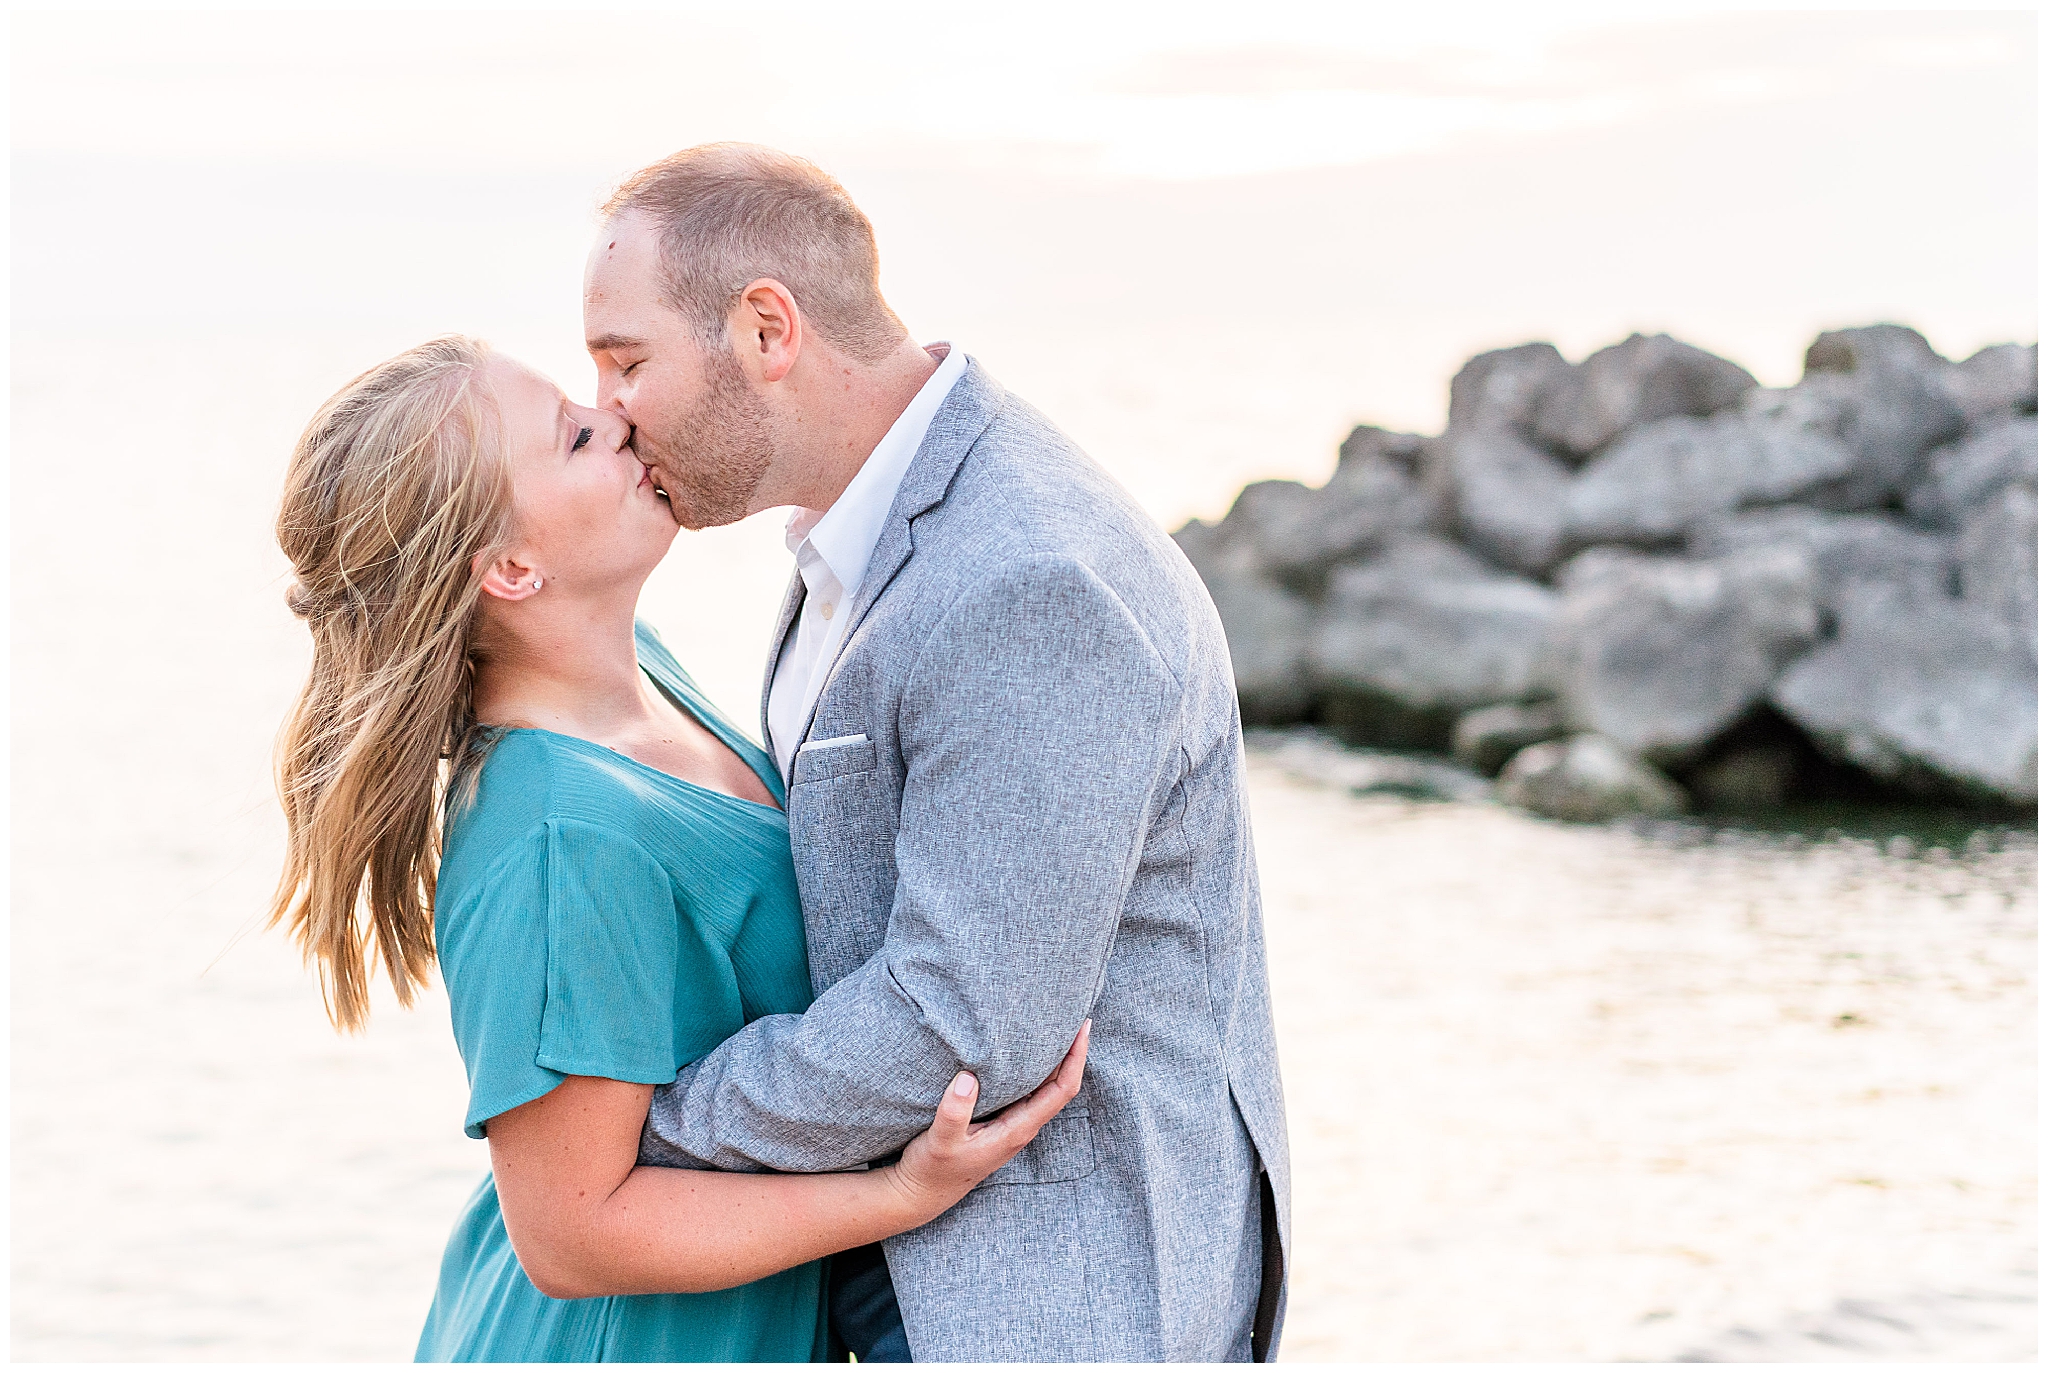 Romantic formal engagement portraits at Sims Park beach in Cleveland Ohio. Woman is wearing a long formal teal gown with flowing sleeves. The man is in a grey suit and white button up shirt. He is holding his fiance by the waist and kissing her, both have their eyes closed. 